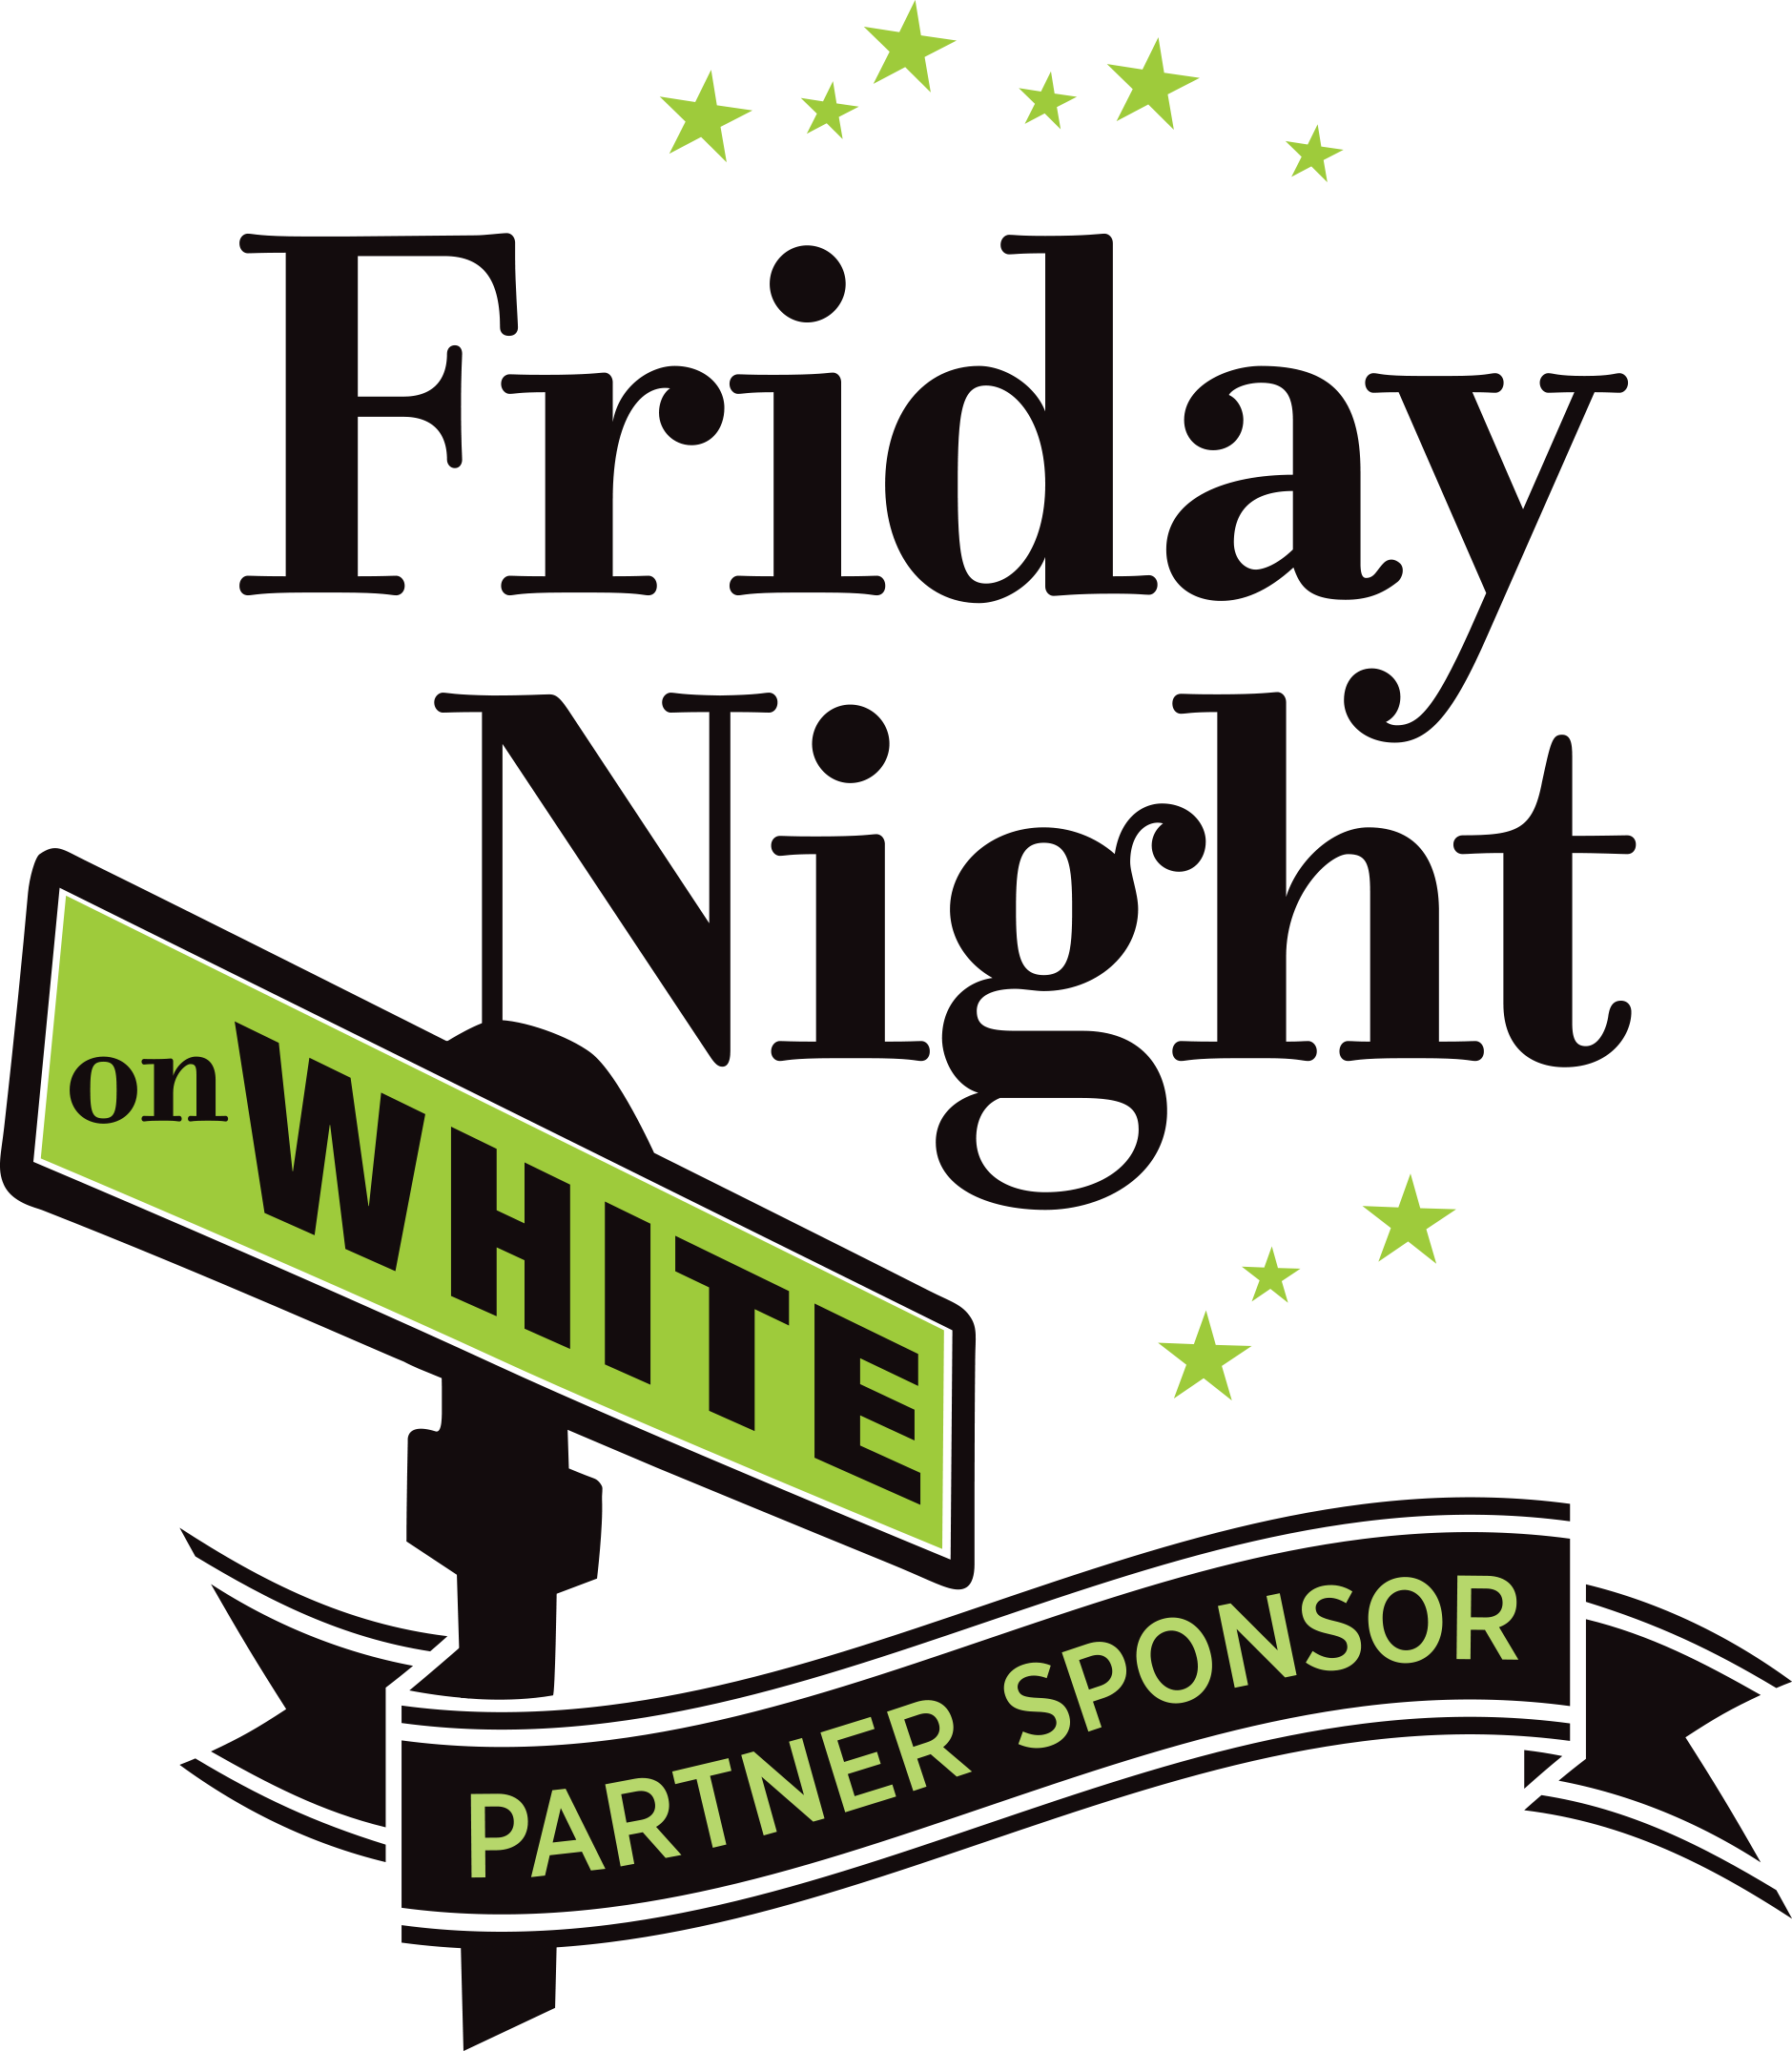 Looking Forward To Seeing You At Friday Night On White - Friday Night On White Wake Forest (1879x2150), Png Download